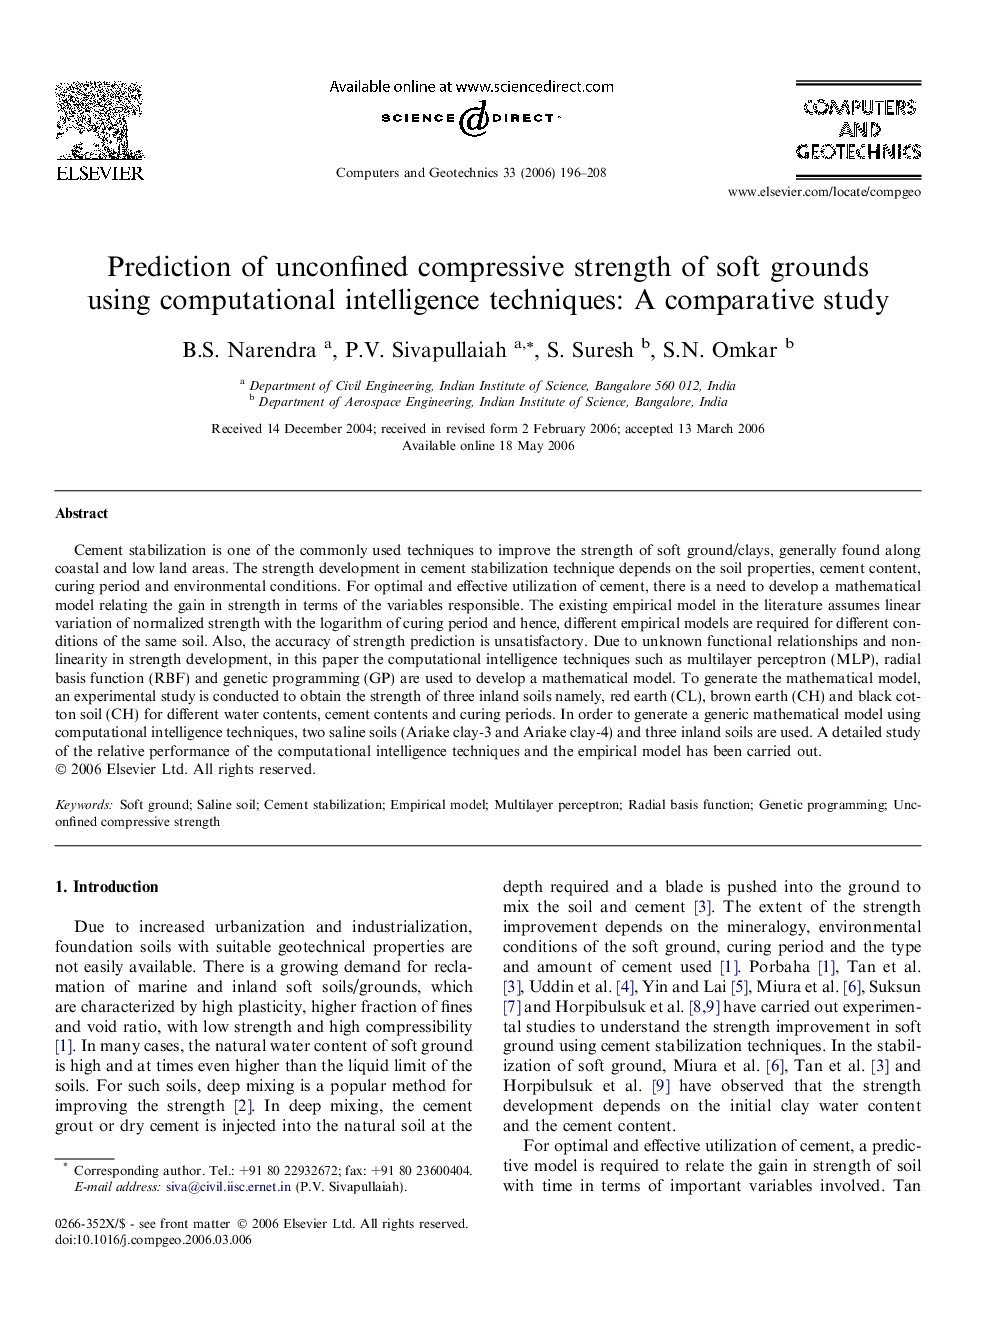 Prediction of unconfined compressive strength of soft grounds using computational intelligence techniques: A comparative study